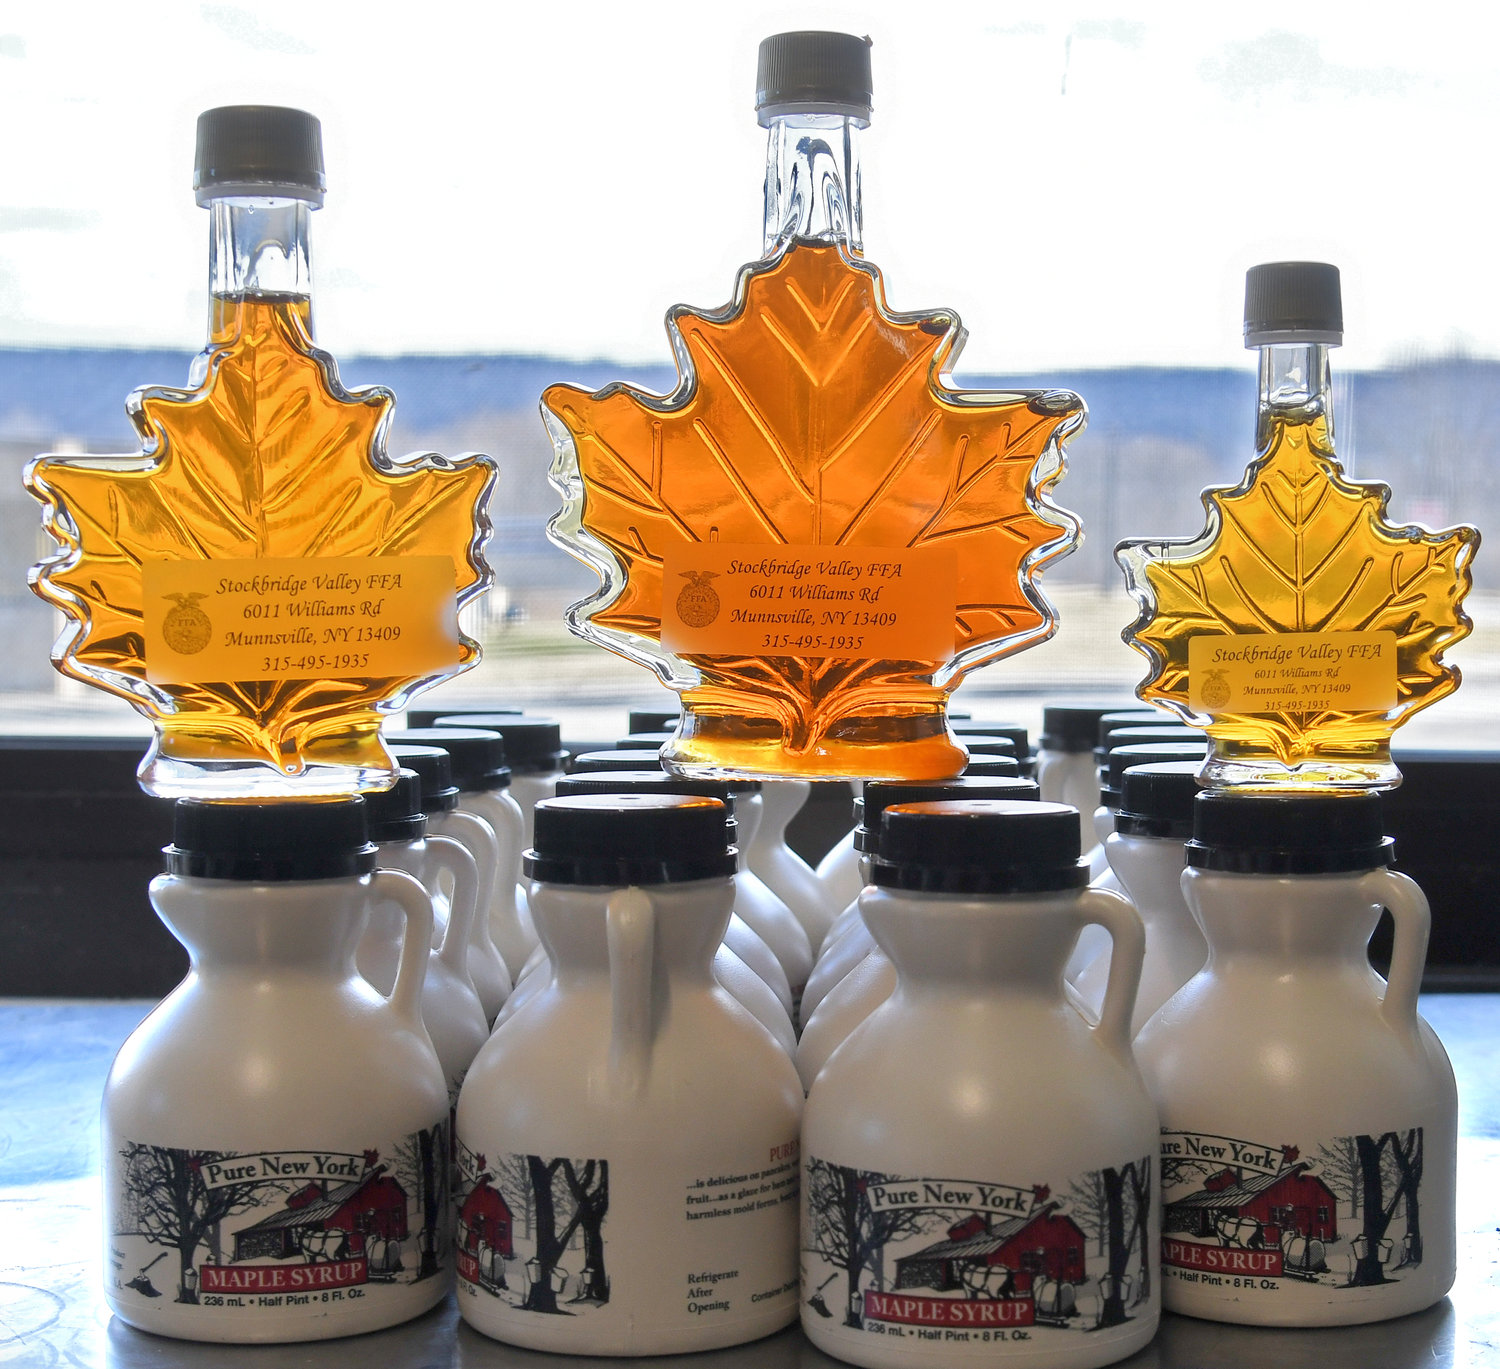 Maple syrup bottles produced by the Stockbridge Valley FFA are displayed Wednesday, Feb. 16 at their sap house in Munnsville.